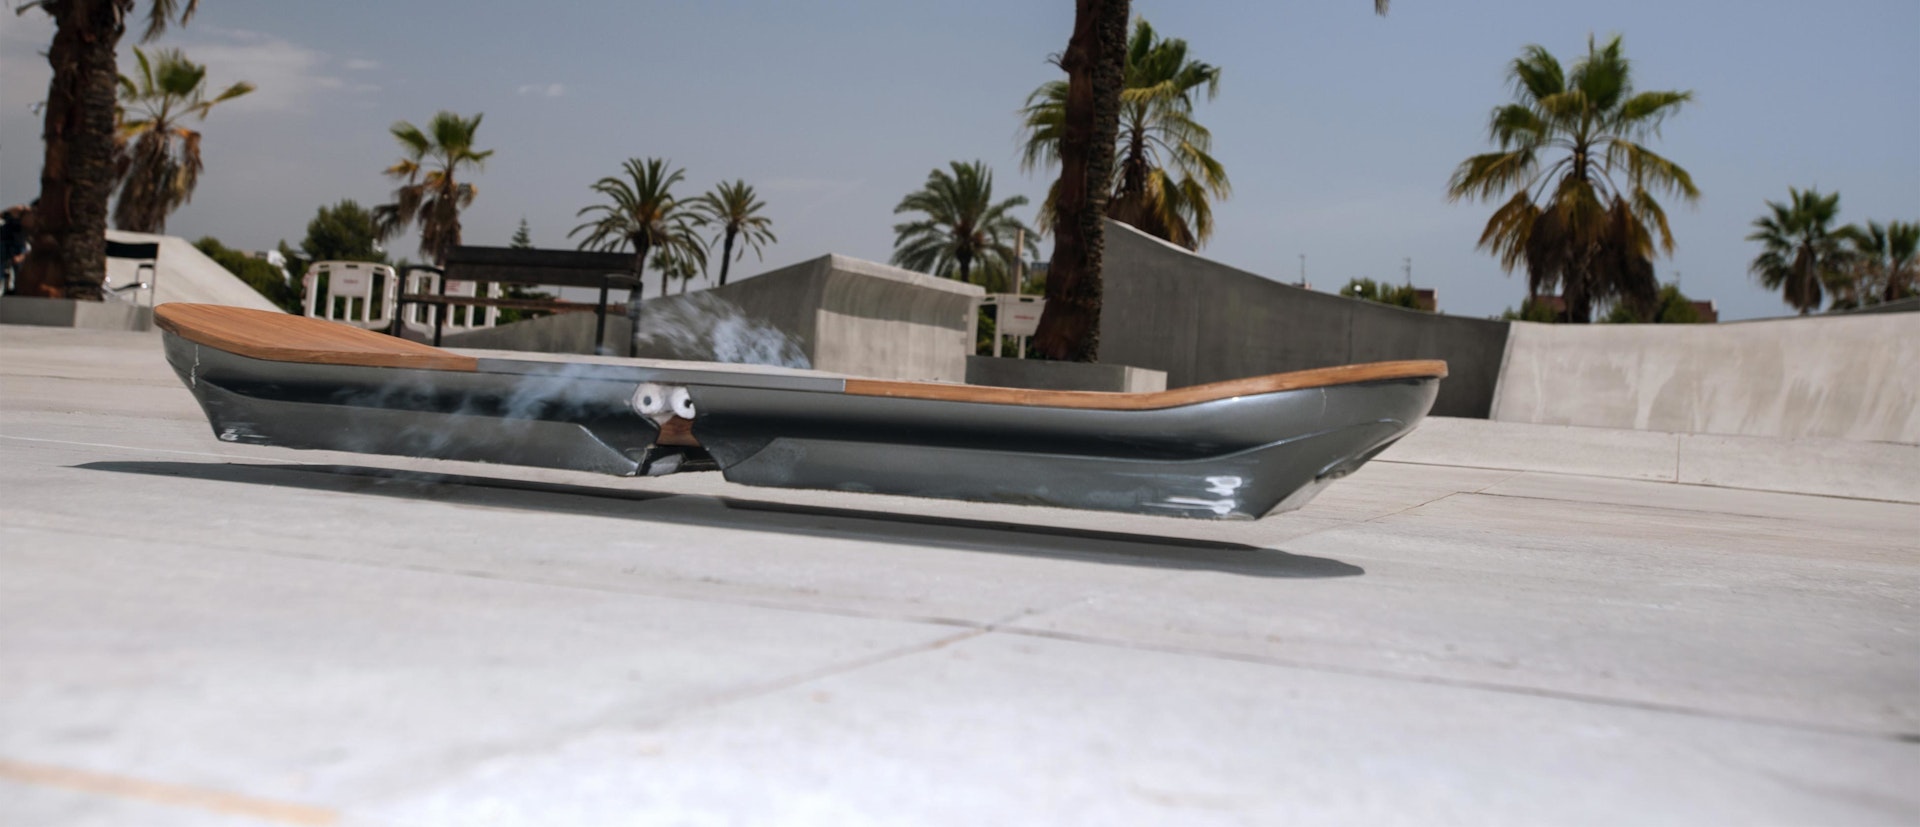 The Lexus hoverboard and the bitter-sweetness of brilliance